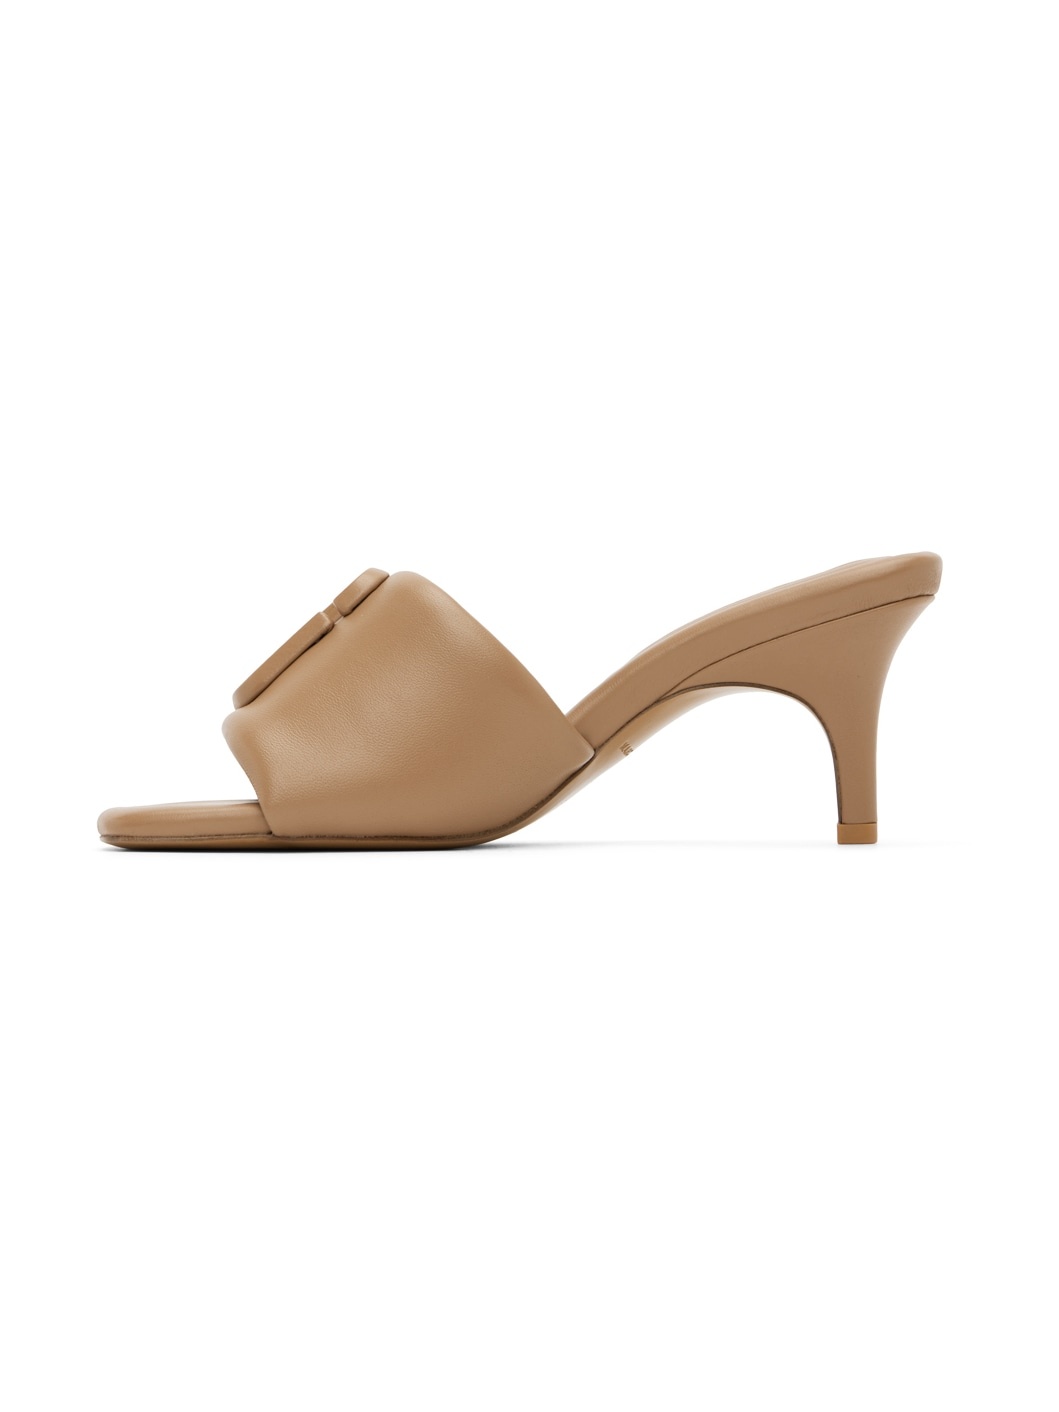 Beige 'The Leather J Marc' Heeled Sandals - 3